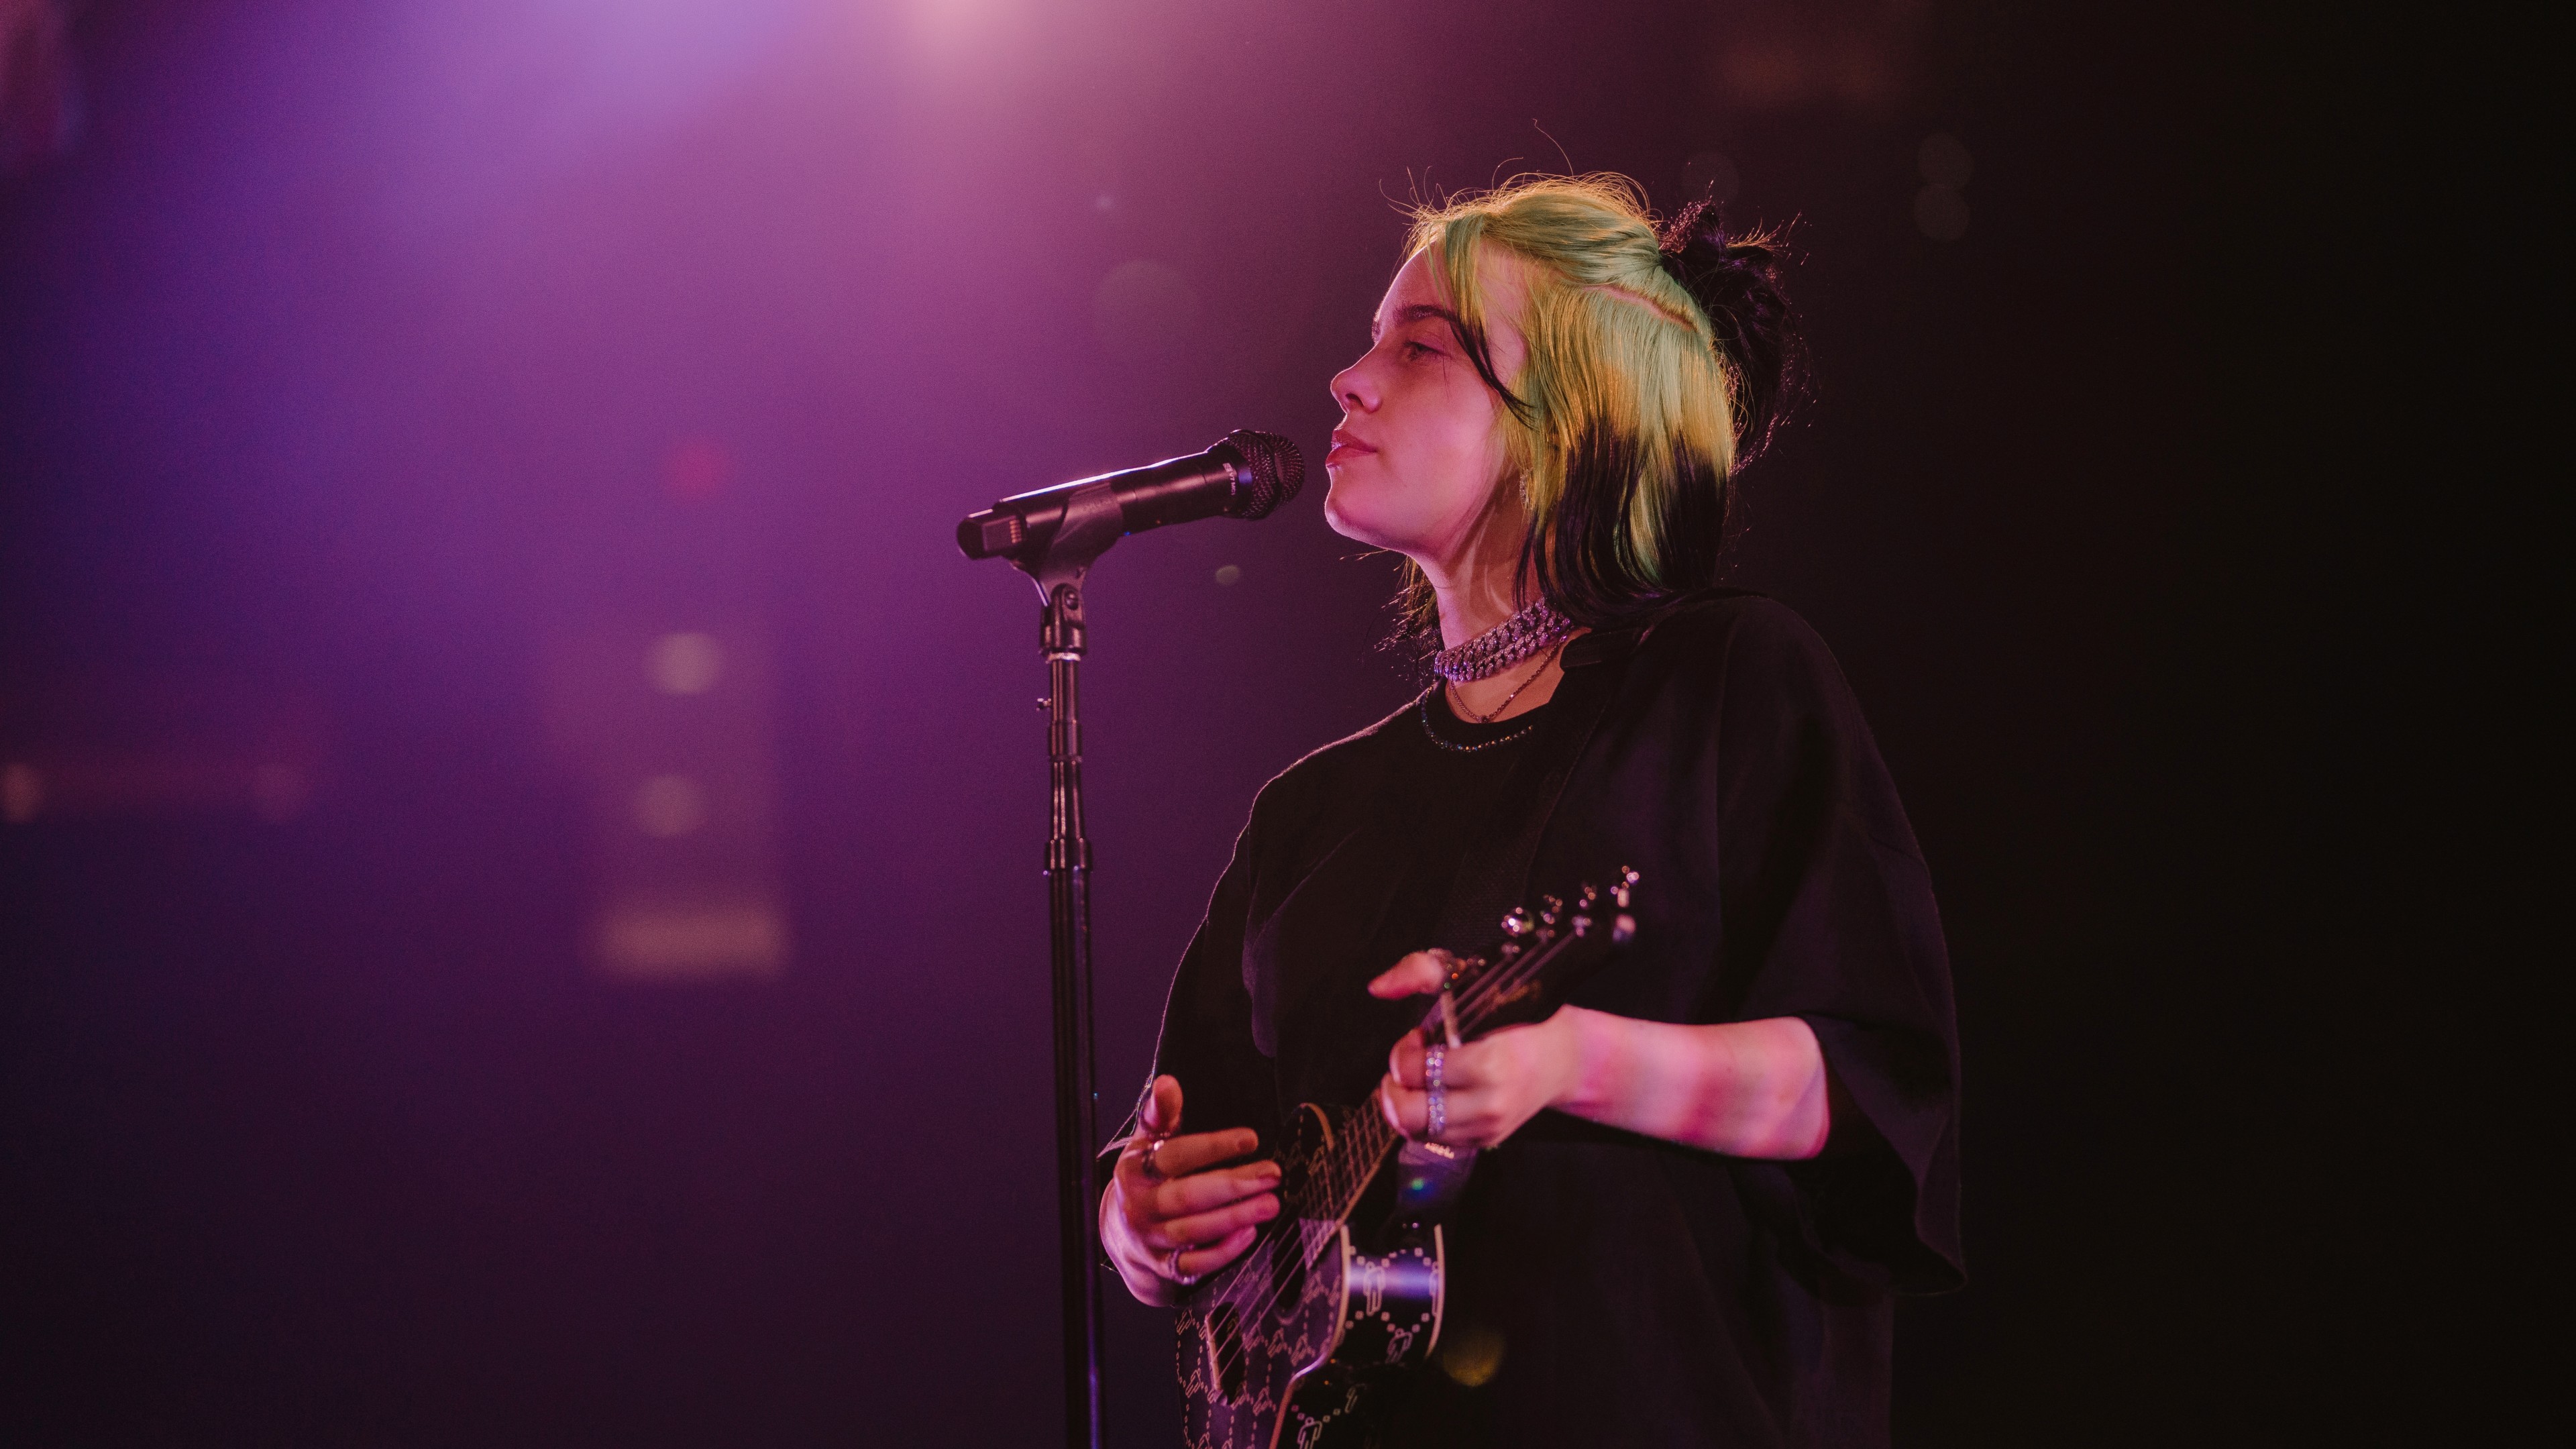 Fender Play Adds Billie Eilish Songs To Their Lessons App